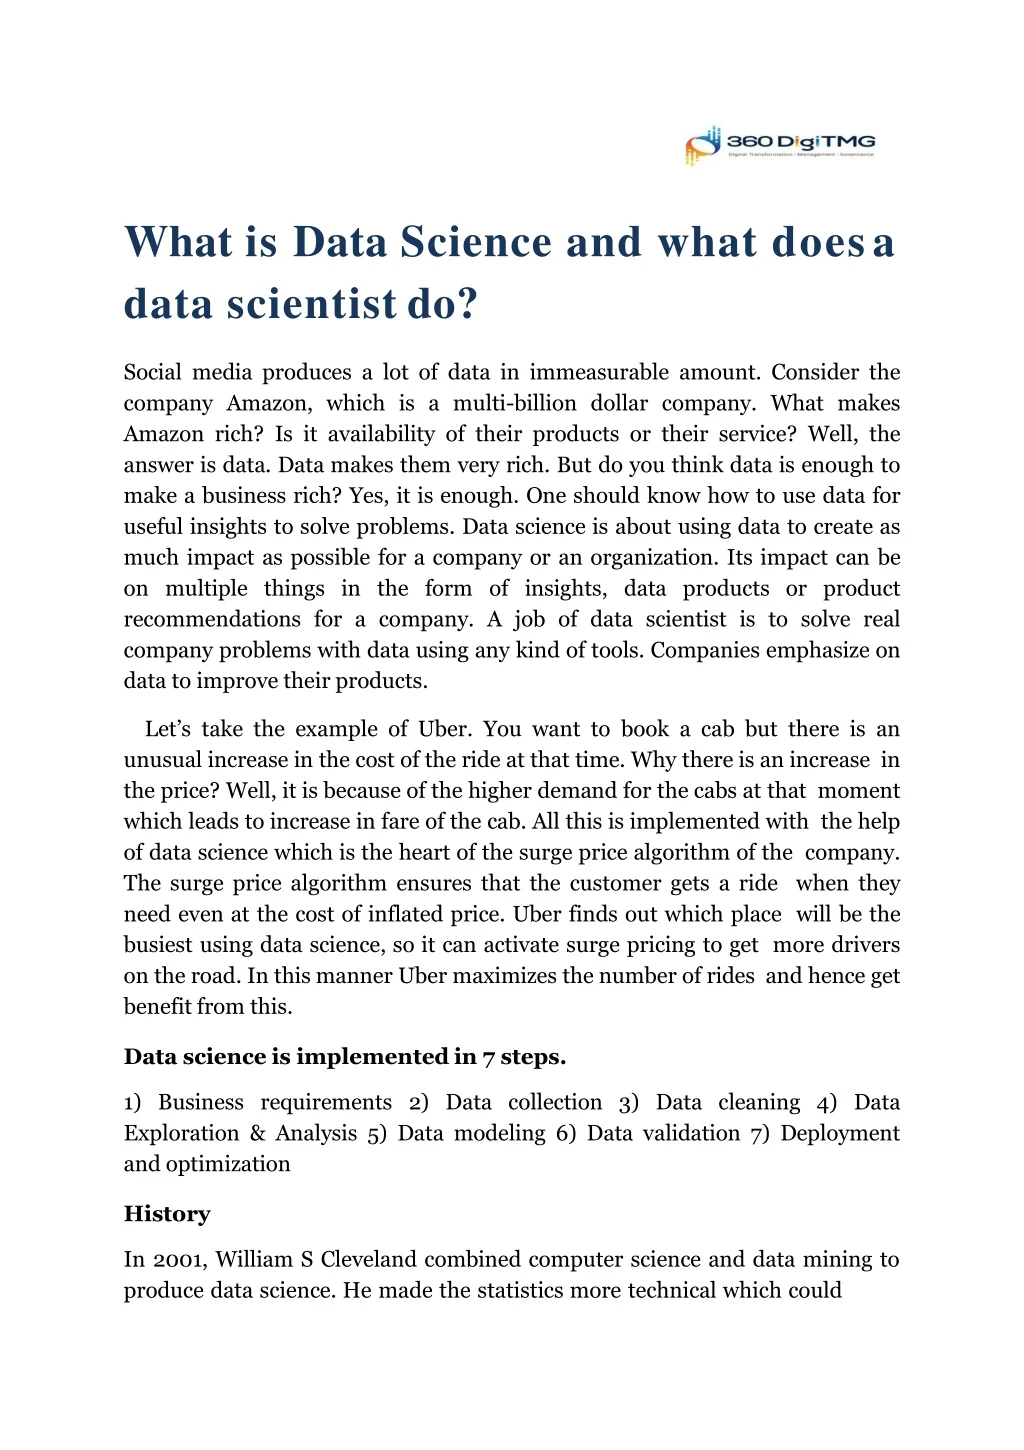 what is data science and what does a data scientist do